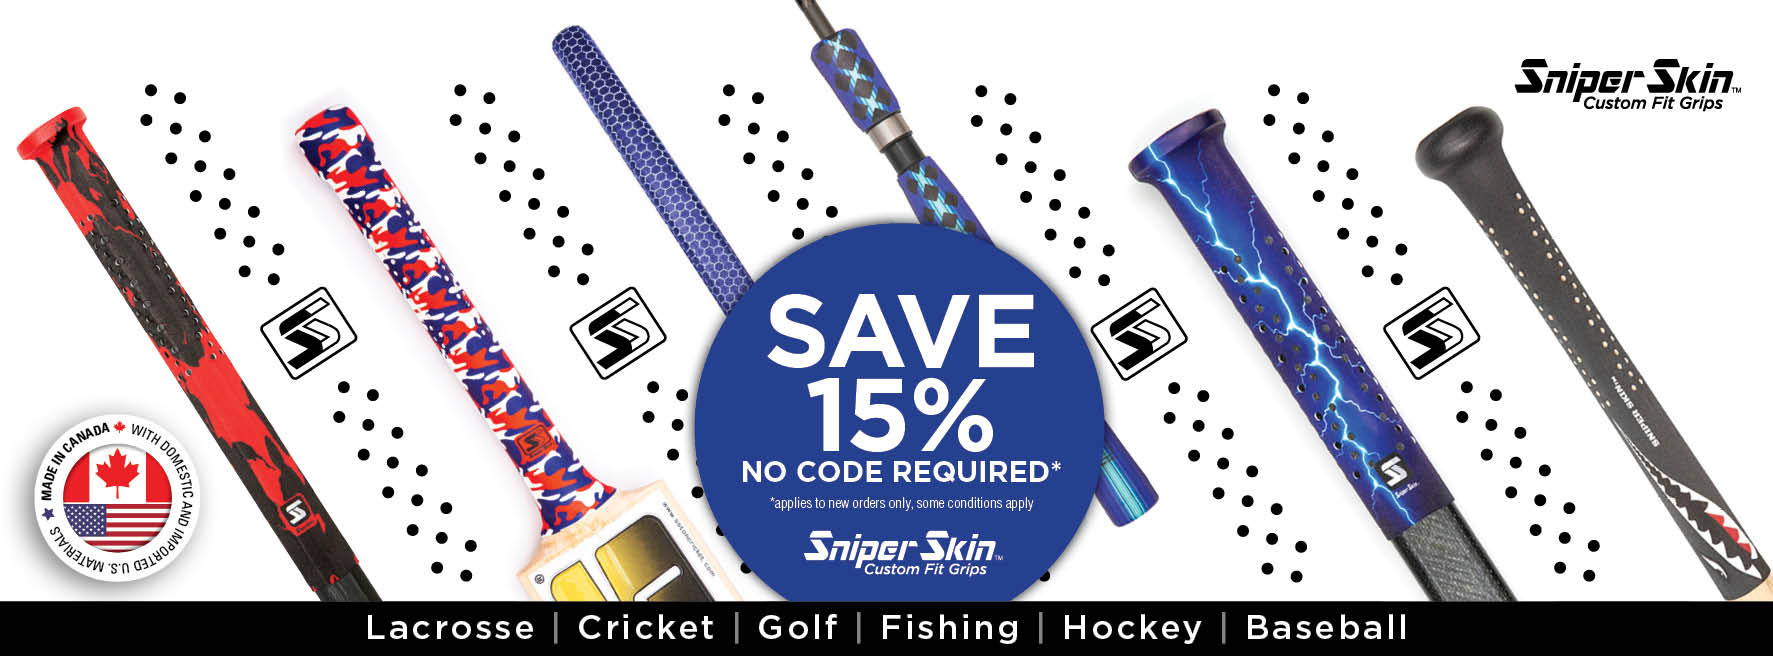 save 15% no code required on the best custom fit grip from sniper skin may15event 